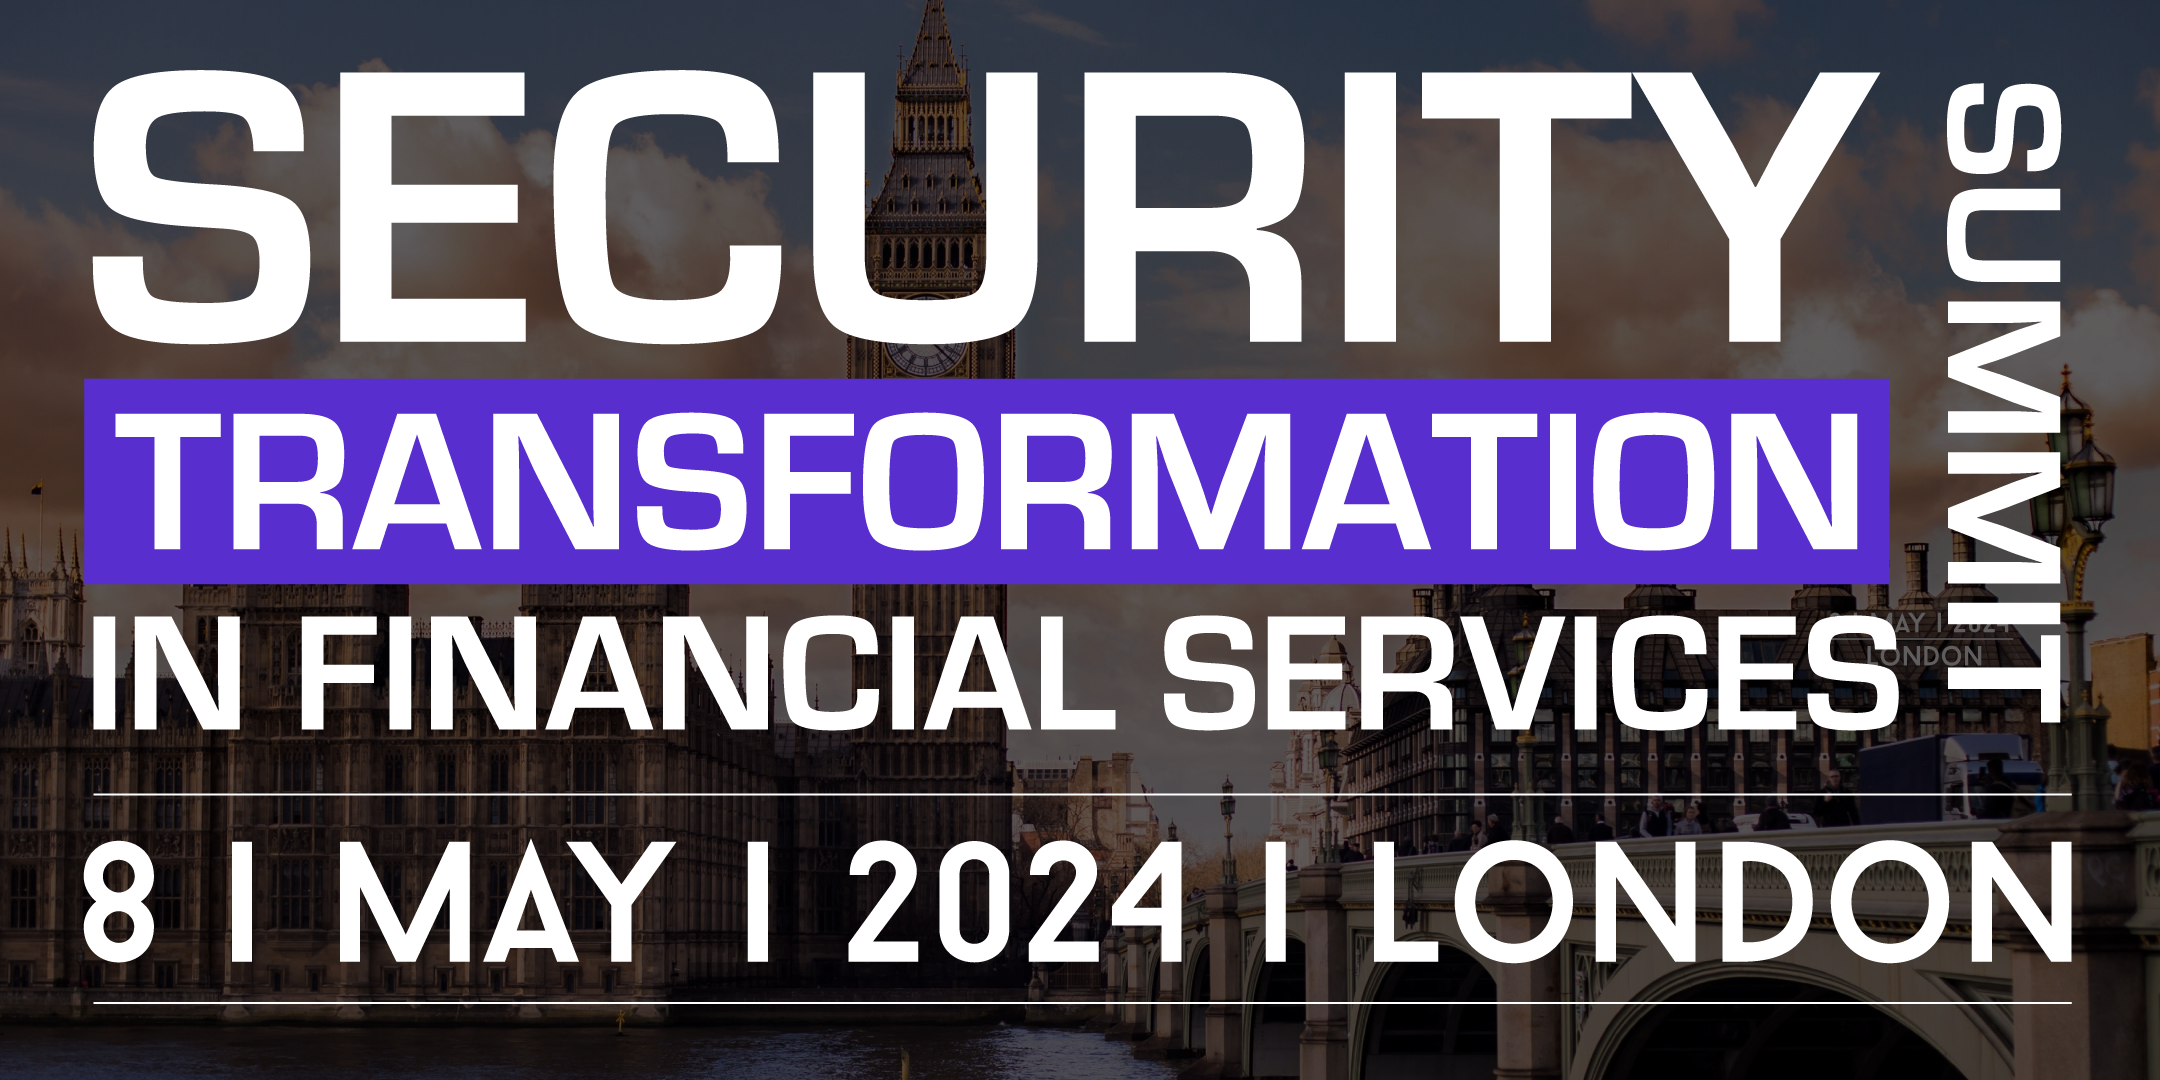 SECURITY TRANSFORMATION IN FINANCIAL SERVICES (LONDON), London, United Kingdom